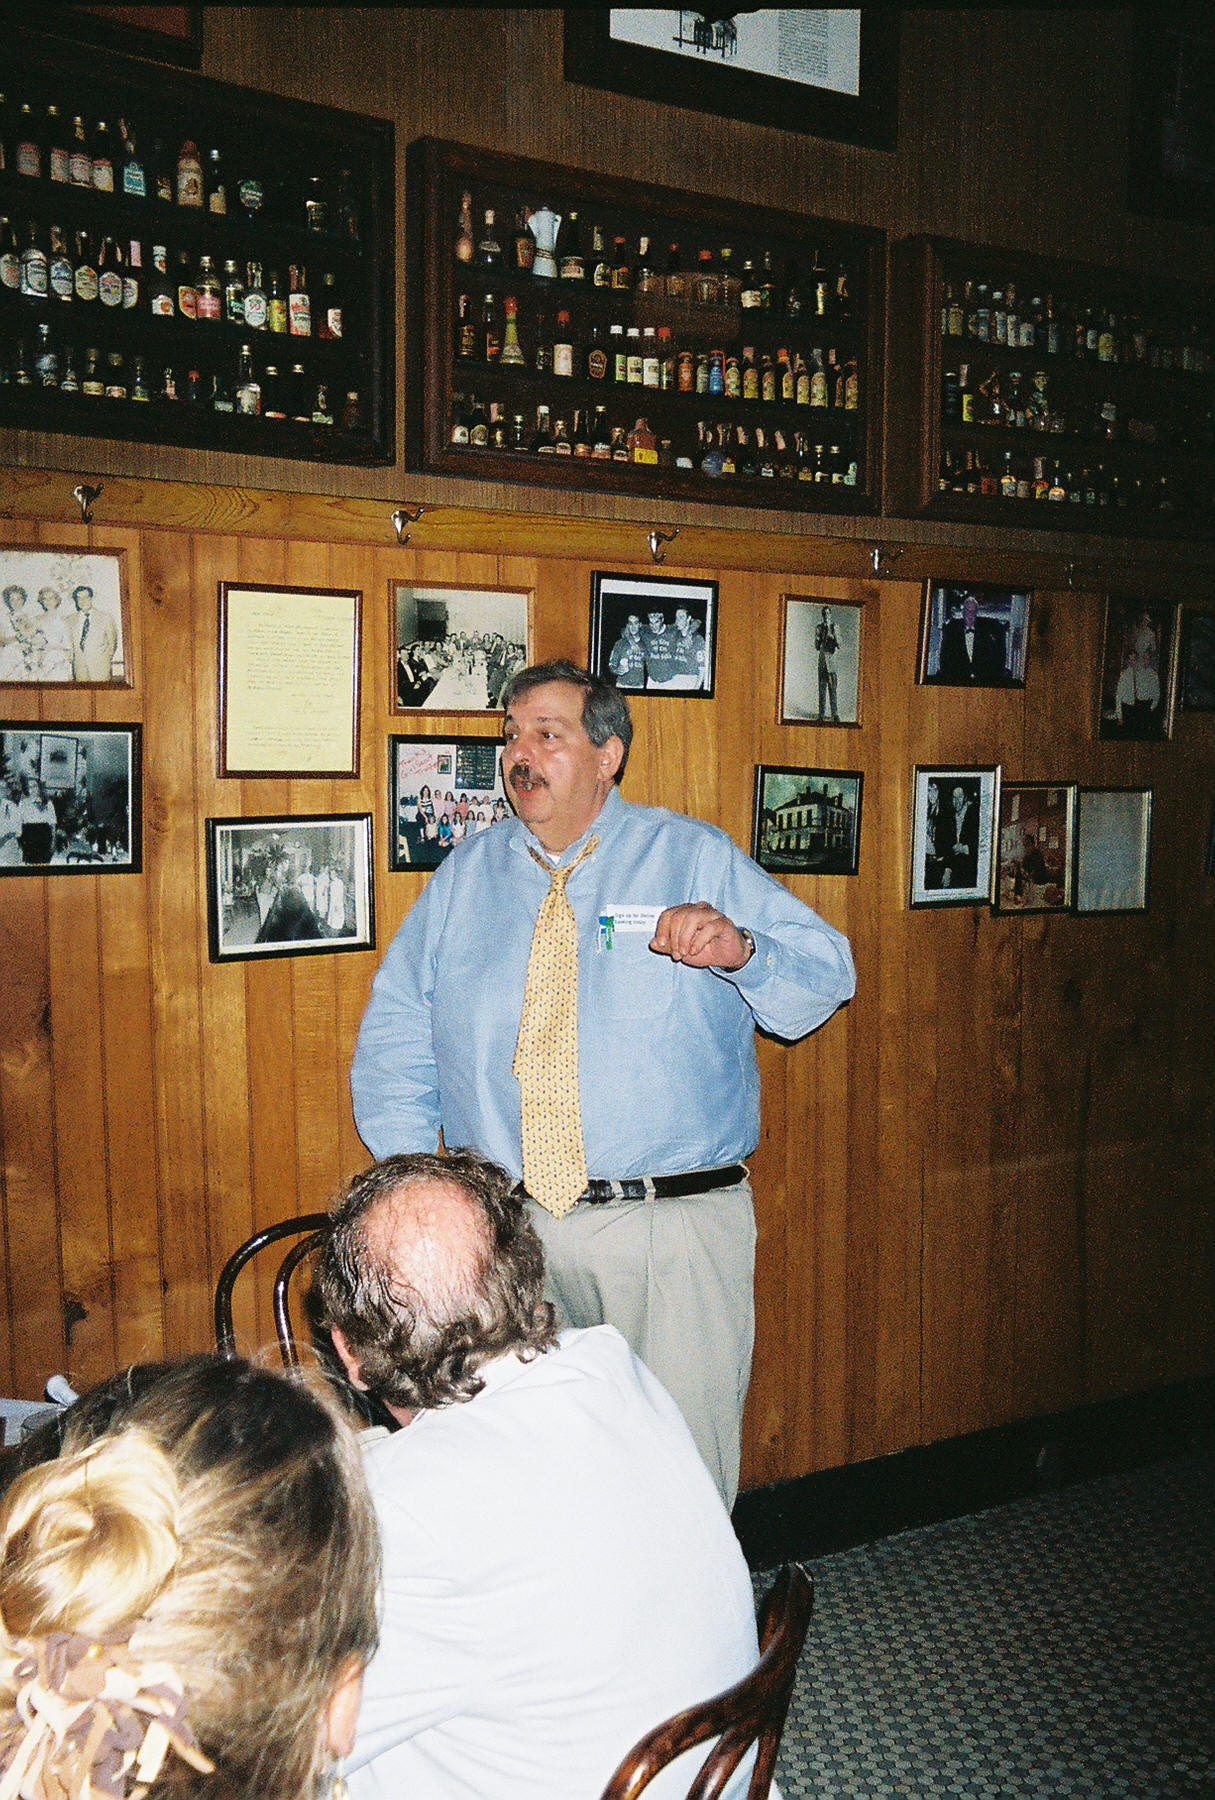 Mr. Steven Latter, the Tujagues Restaurant owner, provides us with a fascinating history of the place.